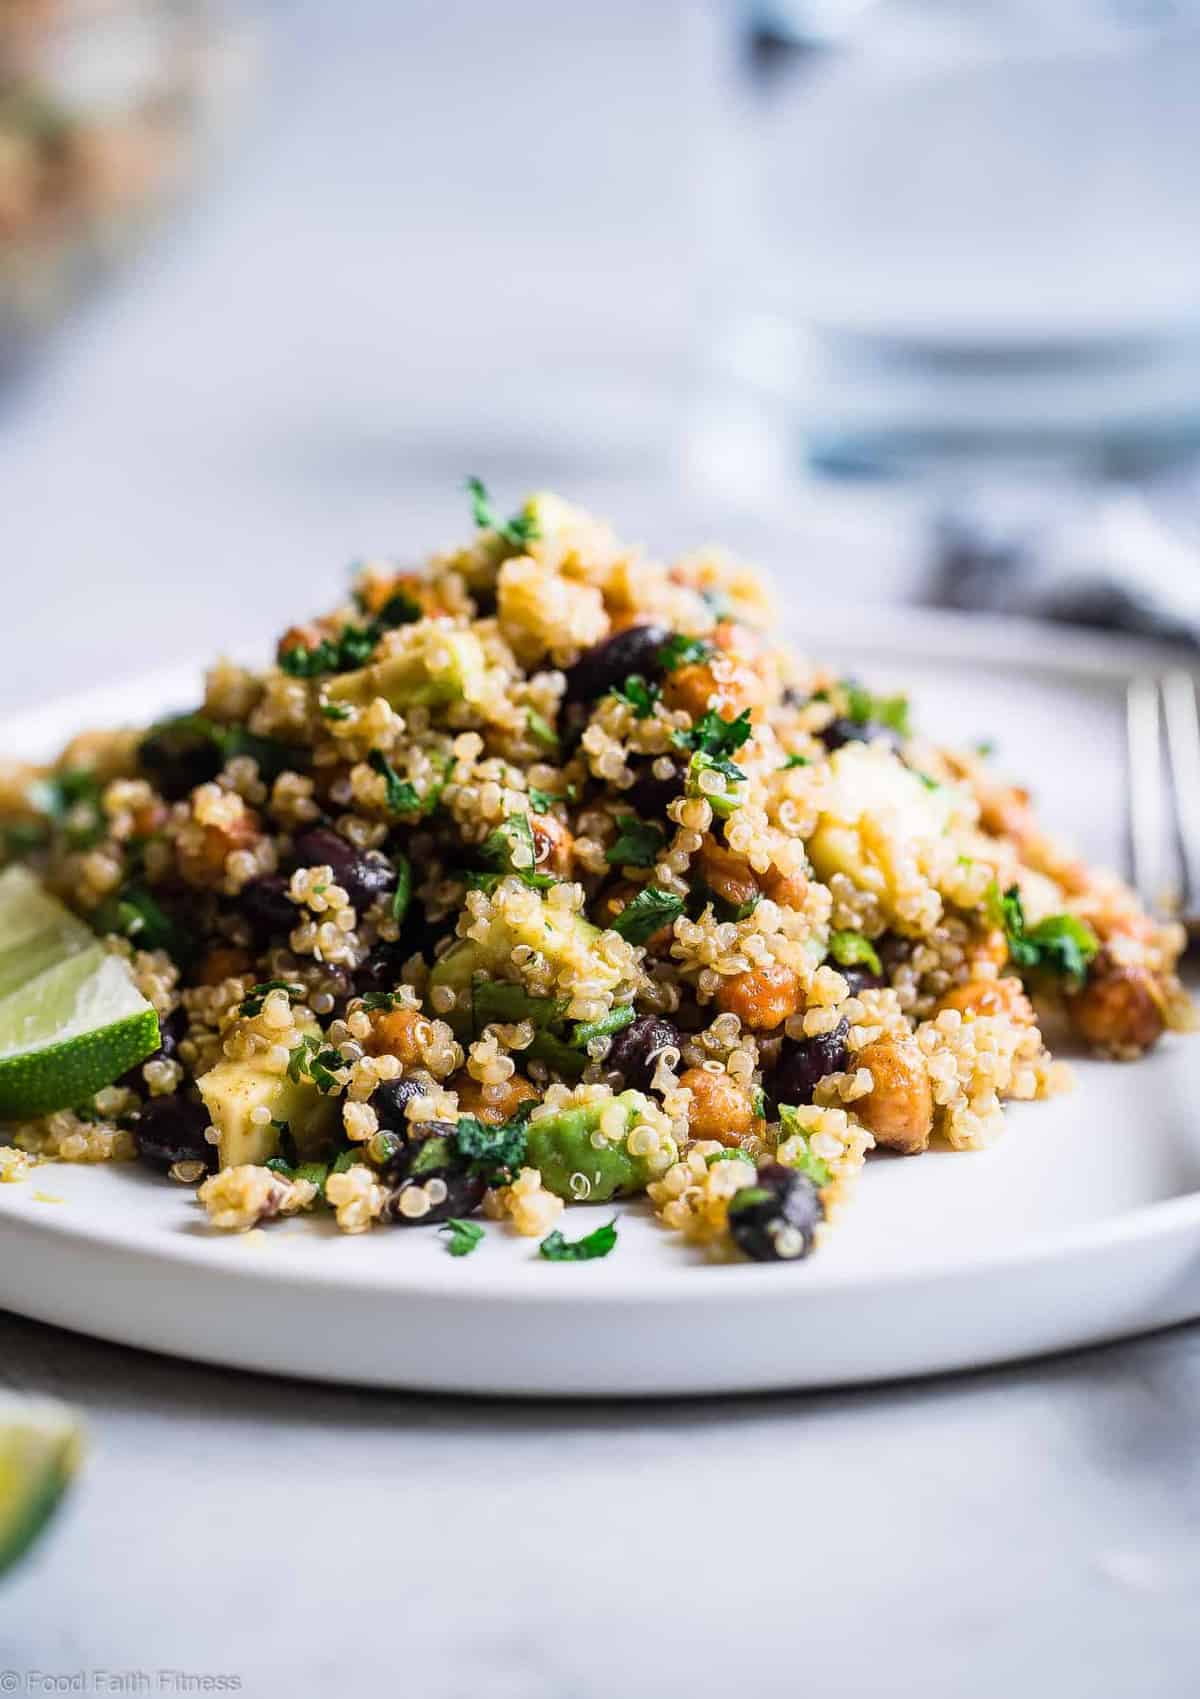 Mexican Quinoa Chickpea Avocado Salad with Black Beans - This EASY quinoa salad is going to be your new favorite side or potluck recipe! It's healthy, gluten free, vegan friendly and CRAZY YUMMY! The Jalapeno lime dressing is EVERYTHING. | #Foodfaithfitness | #Vegan #Healthy #GlutenFree #Dairyfree #Quinoa